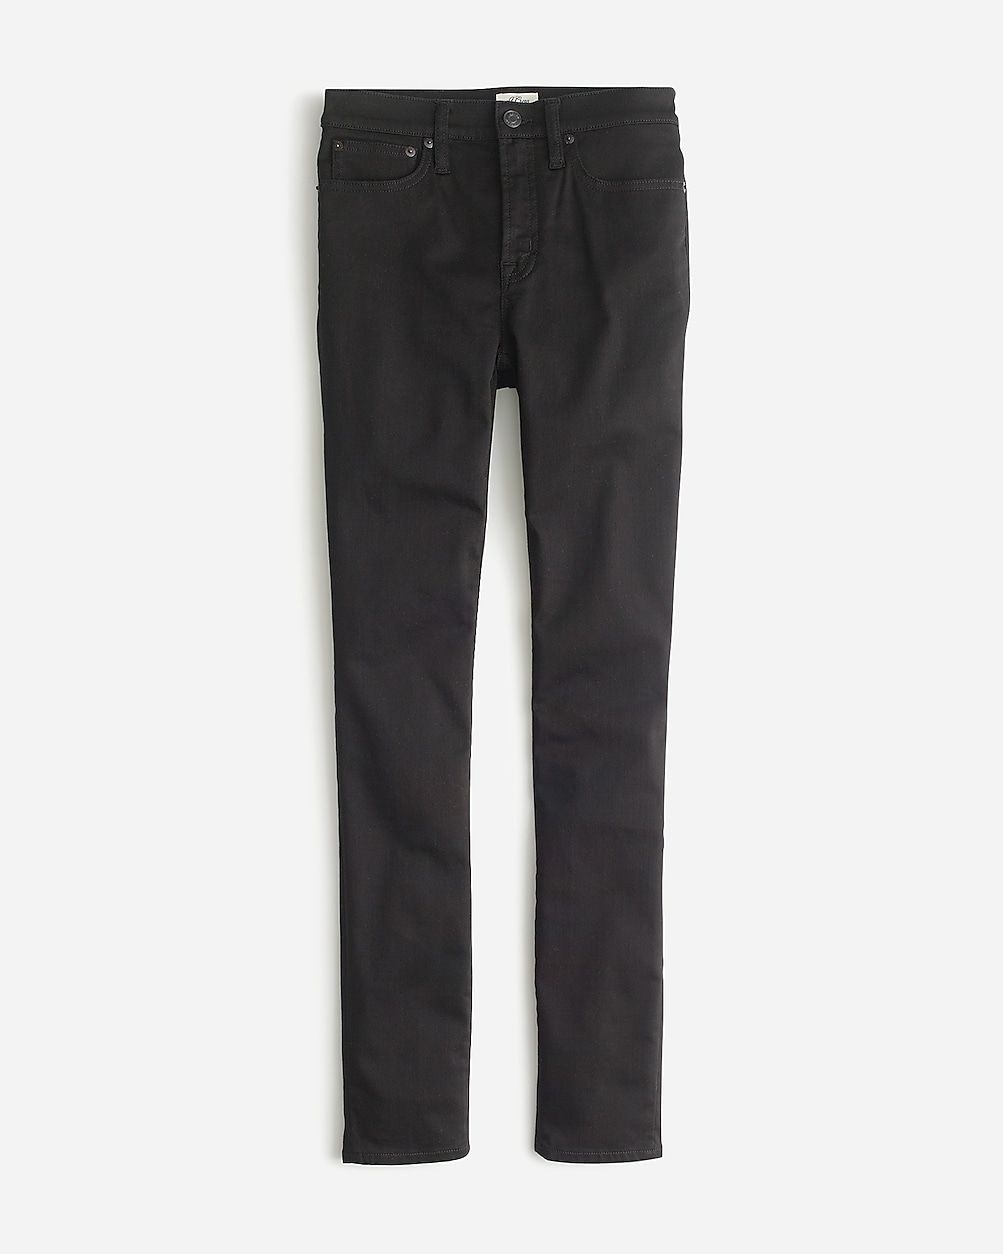 9" mid-rise stretchy toothpick jean in new black | J.Crew US